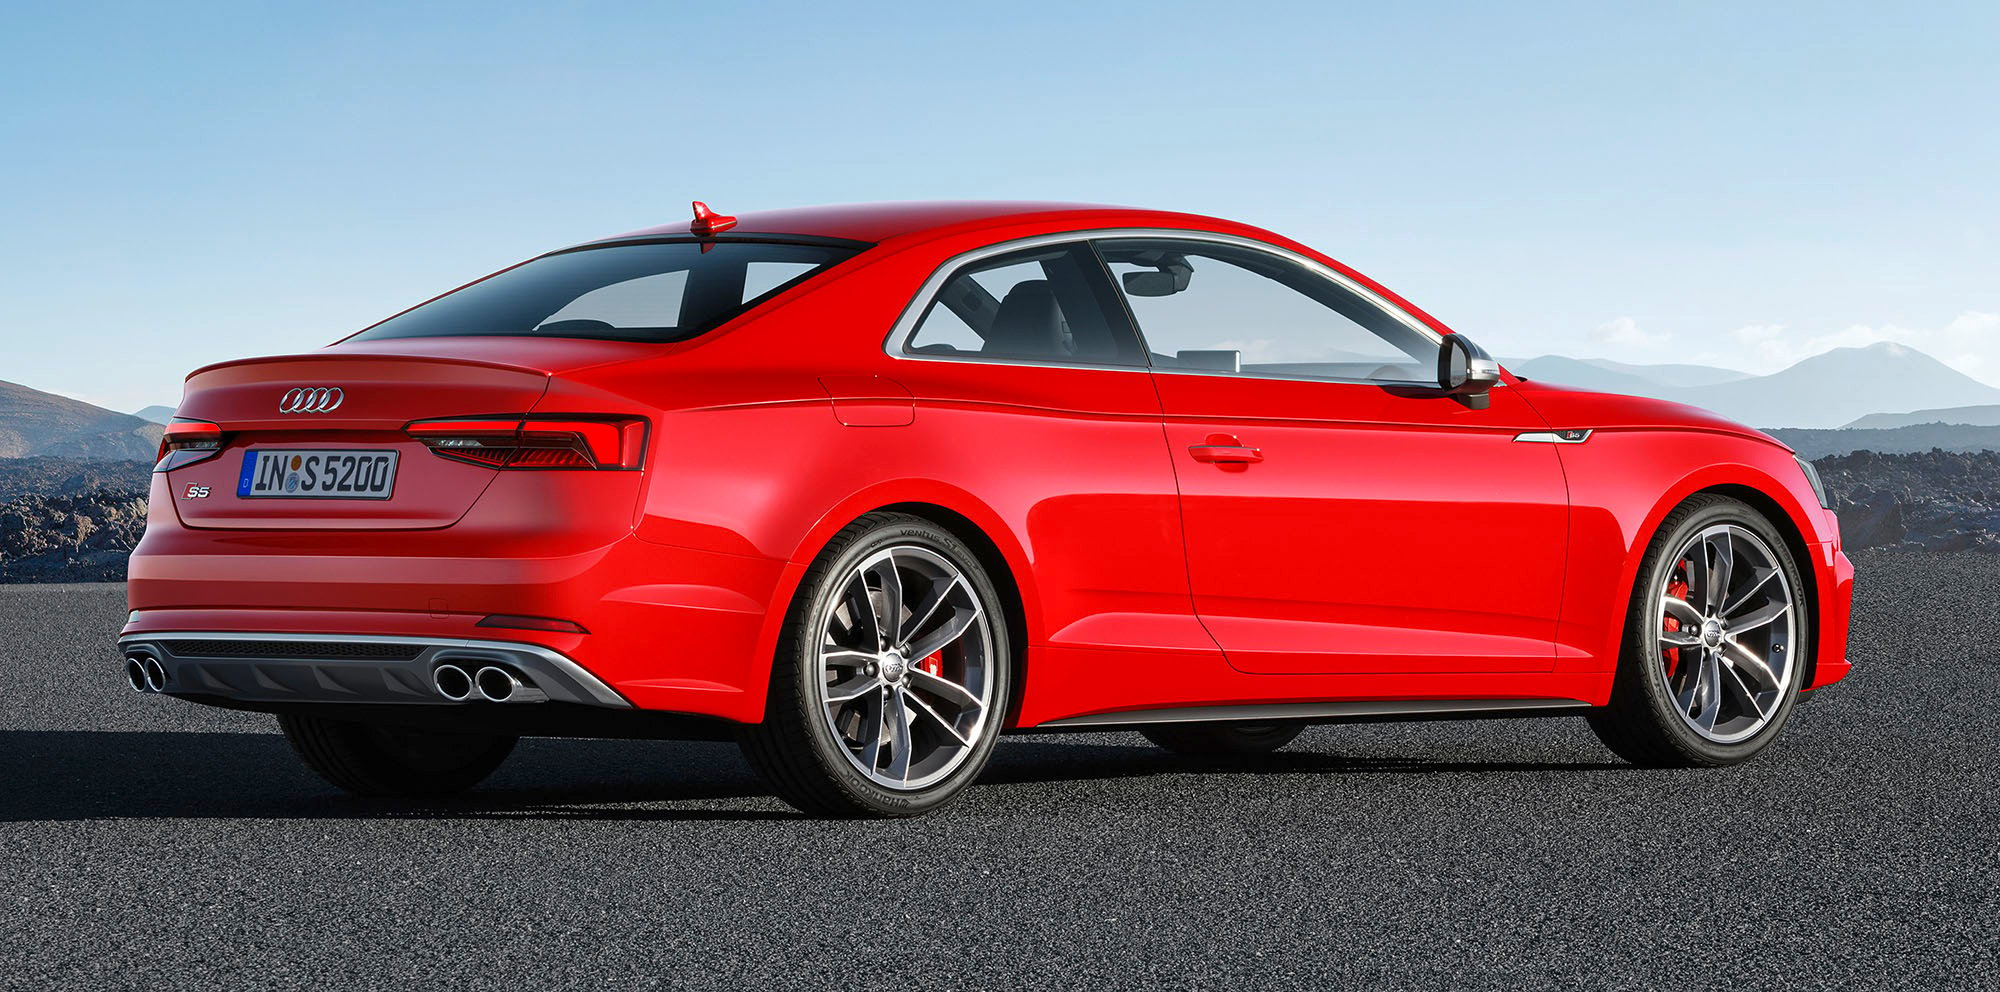 2017 Audi A5 Coupe, S5 Coupe revealed: Australian launch ...